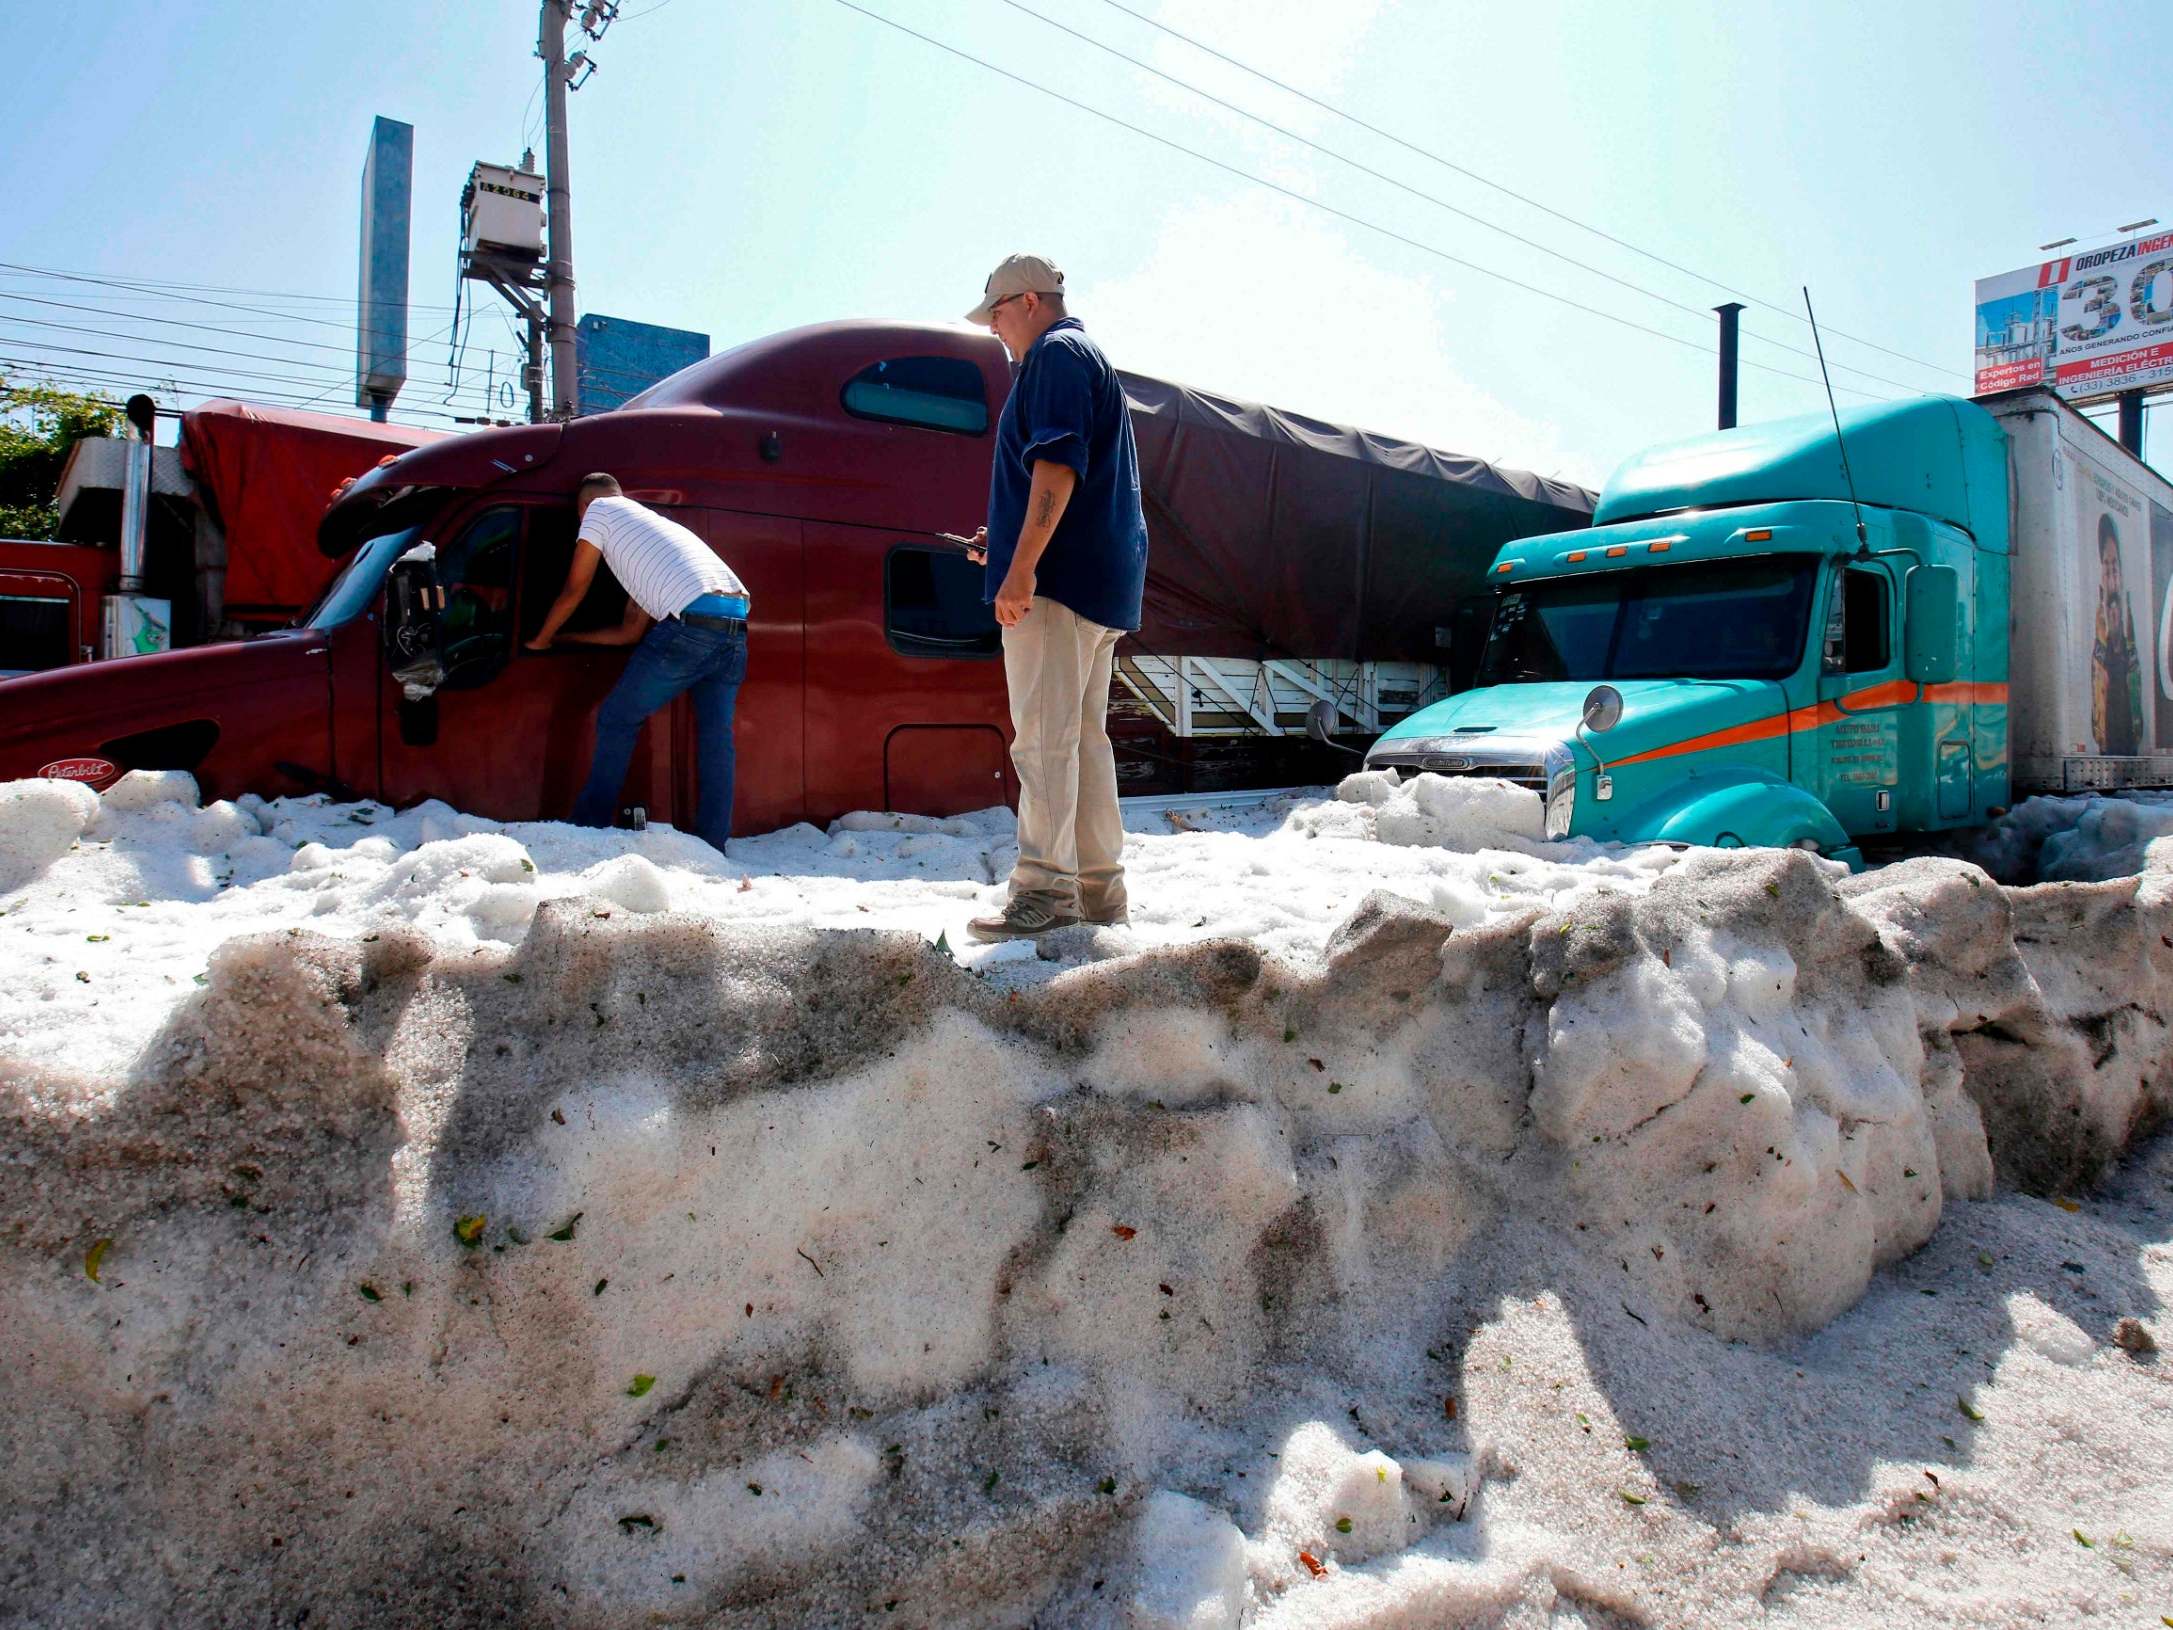 Men remain next to trucks buried in hail in the eastern area of Guadalajara, Jalisco state, Mexico